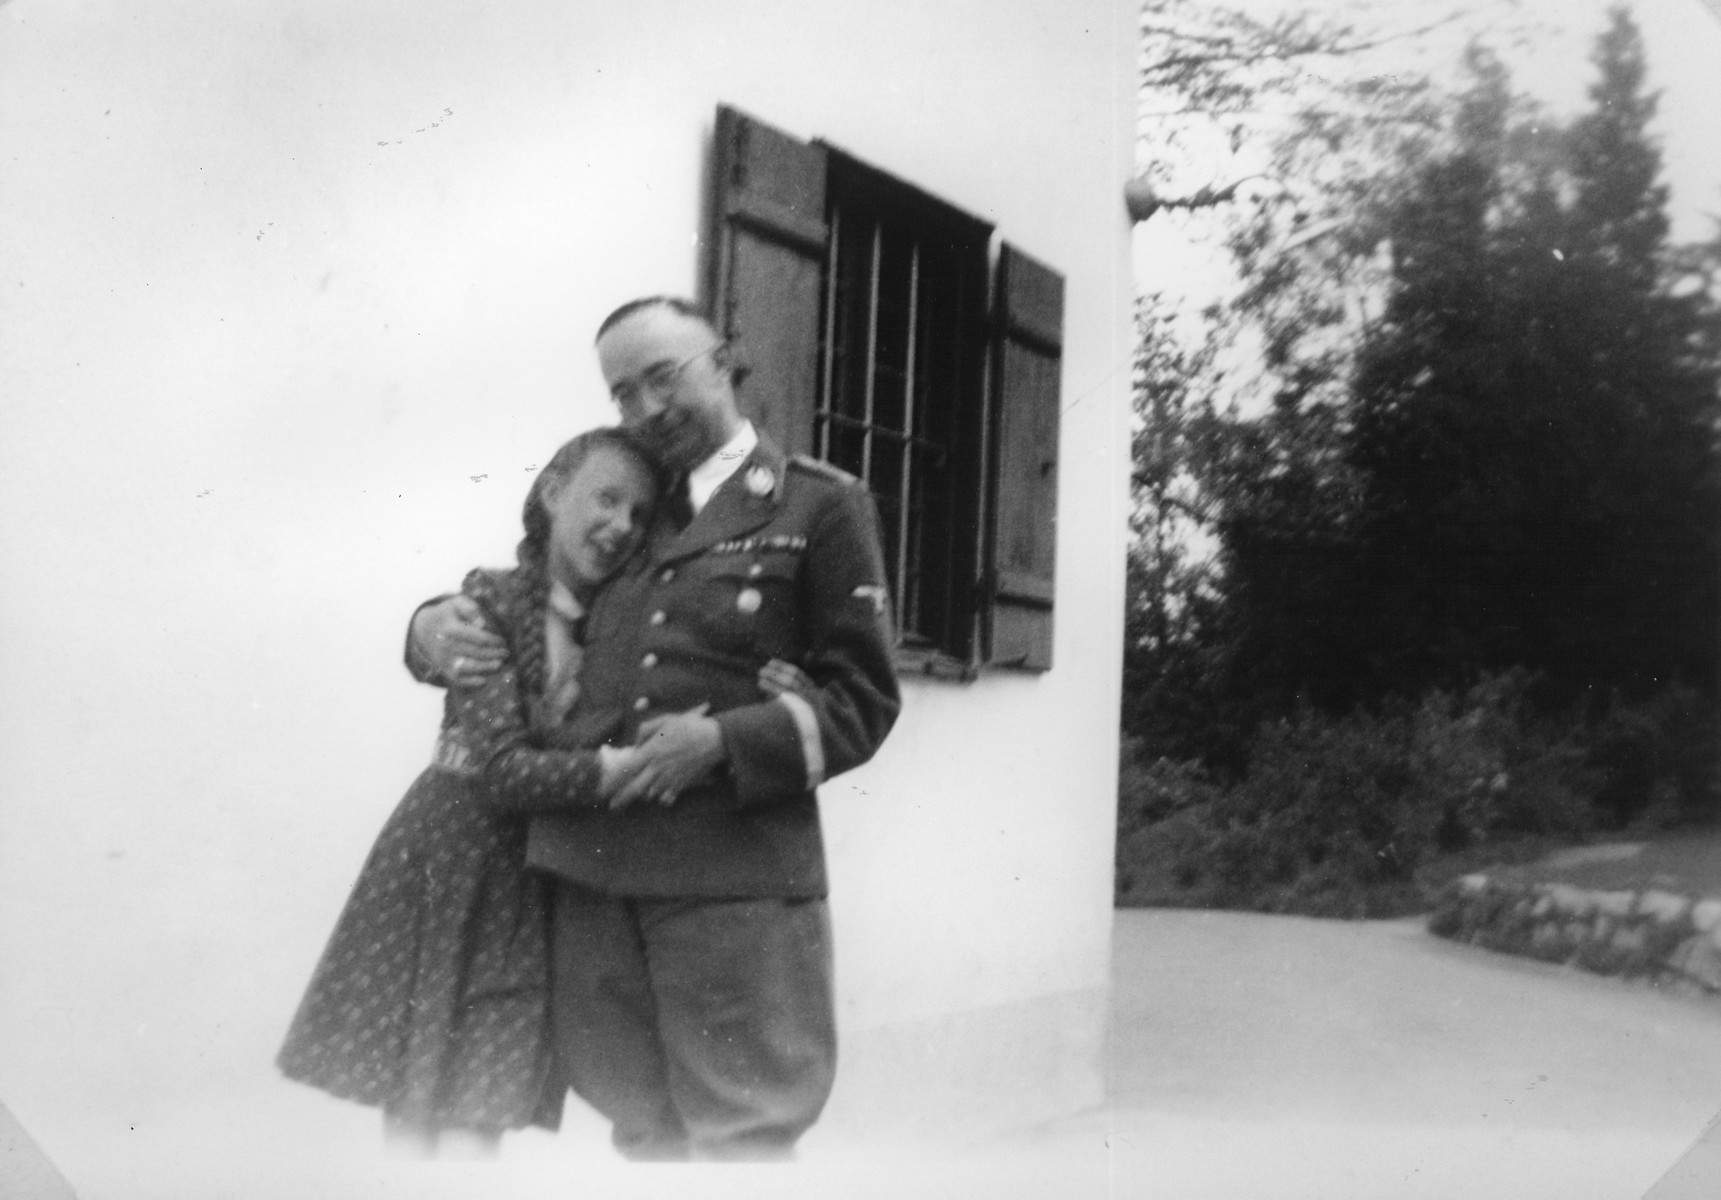 Reichsfuehrer-SS Heinrich Himmler embraces his daughter Gudrun [probably outside their home in Gmund am Tagernsee].